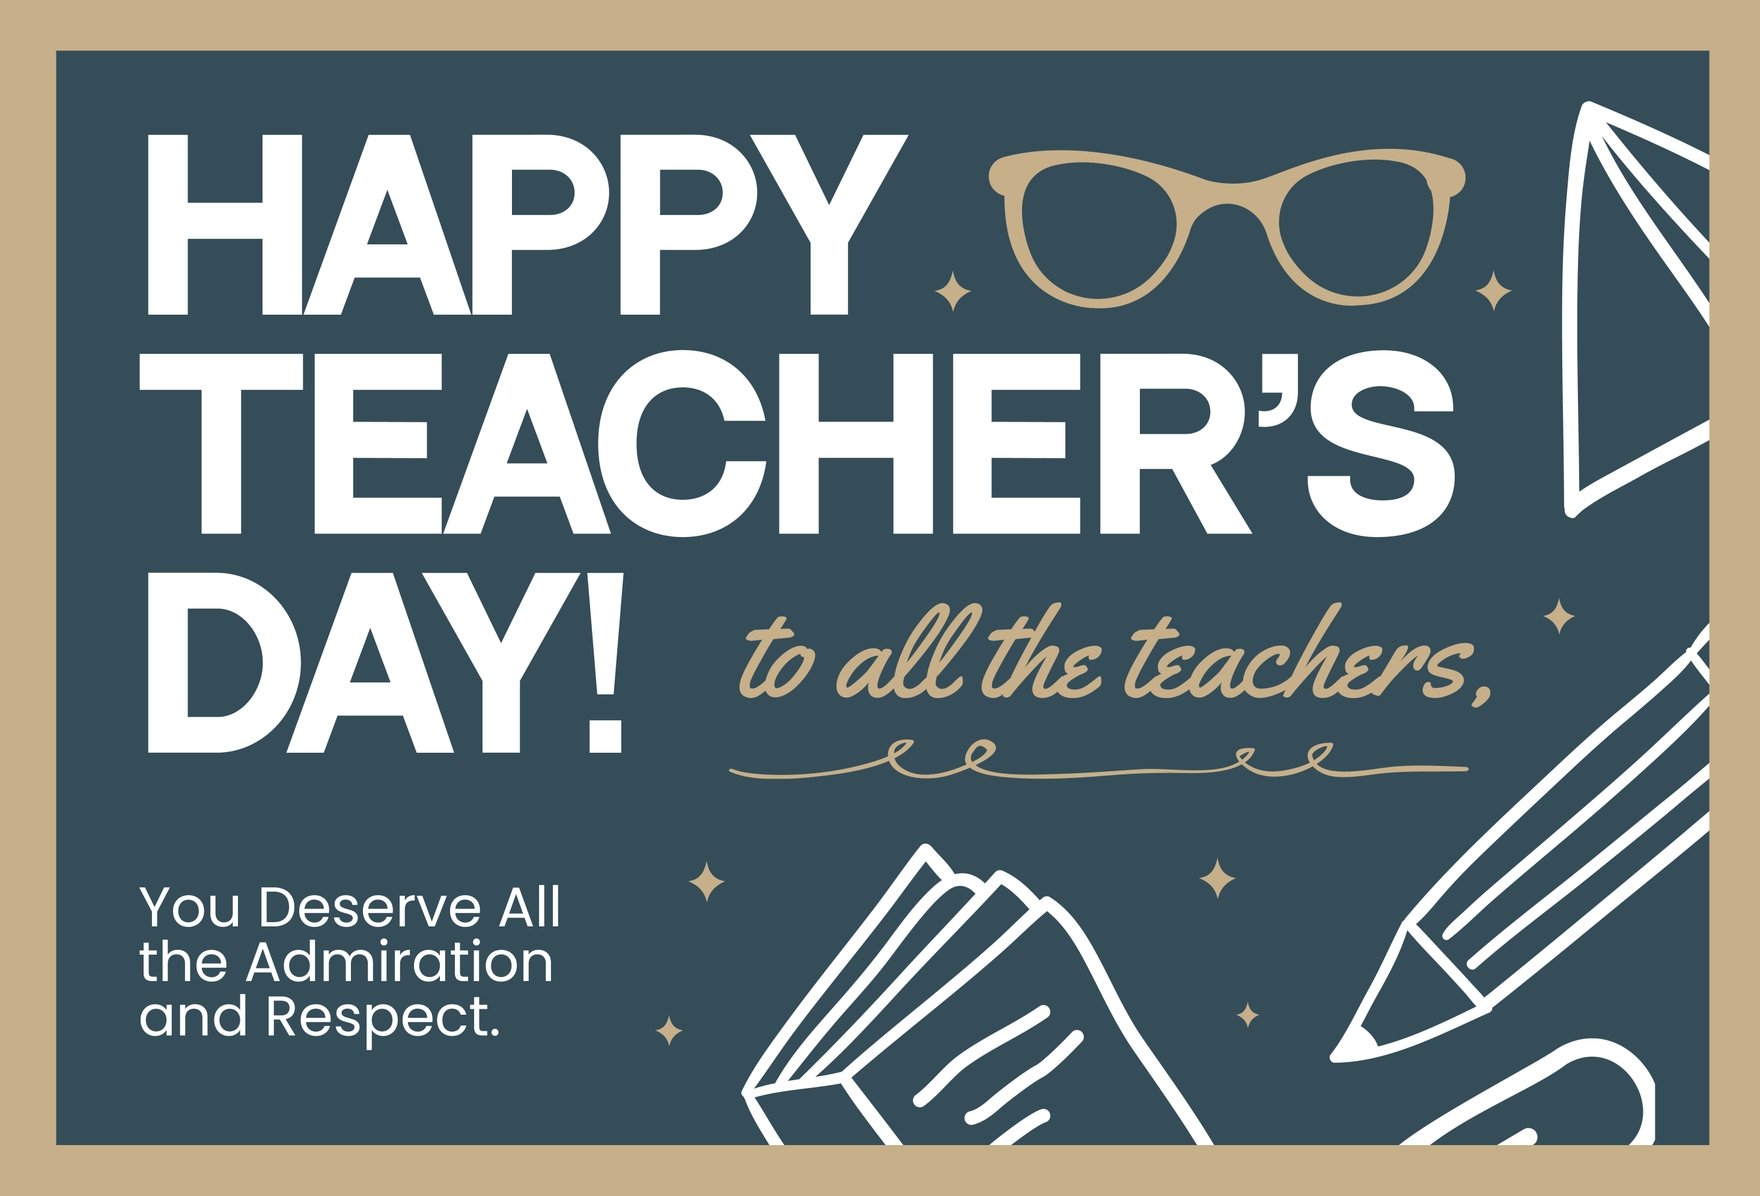 Free Happy Teacher's Day Messages Wishes in Word, Illustrator, PSD